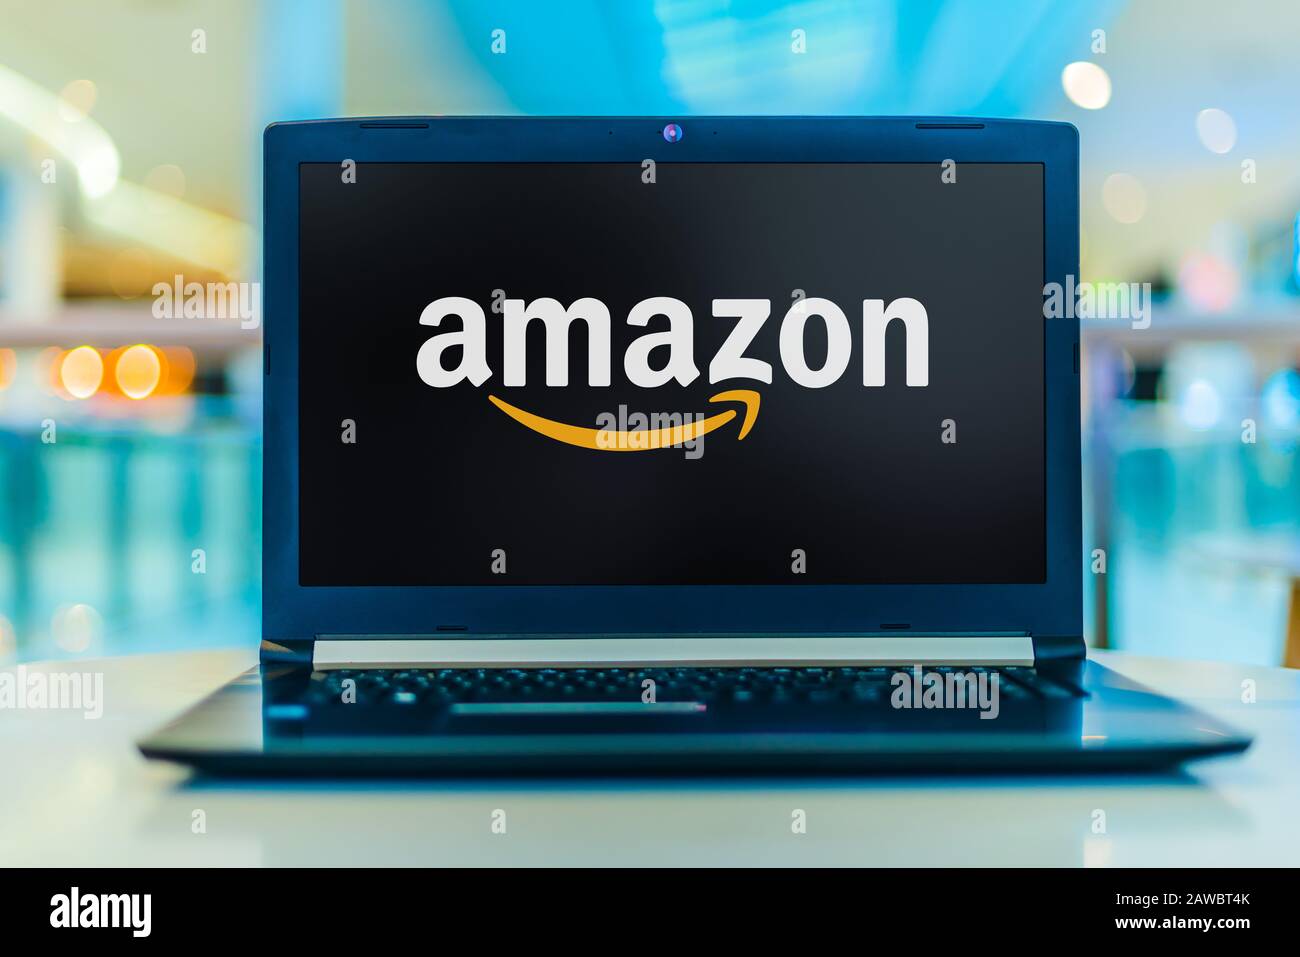 Amazon music logo hi-res stock photography and images - Alamy